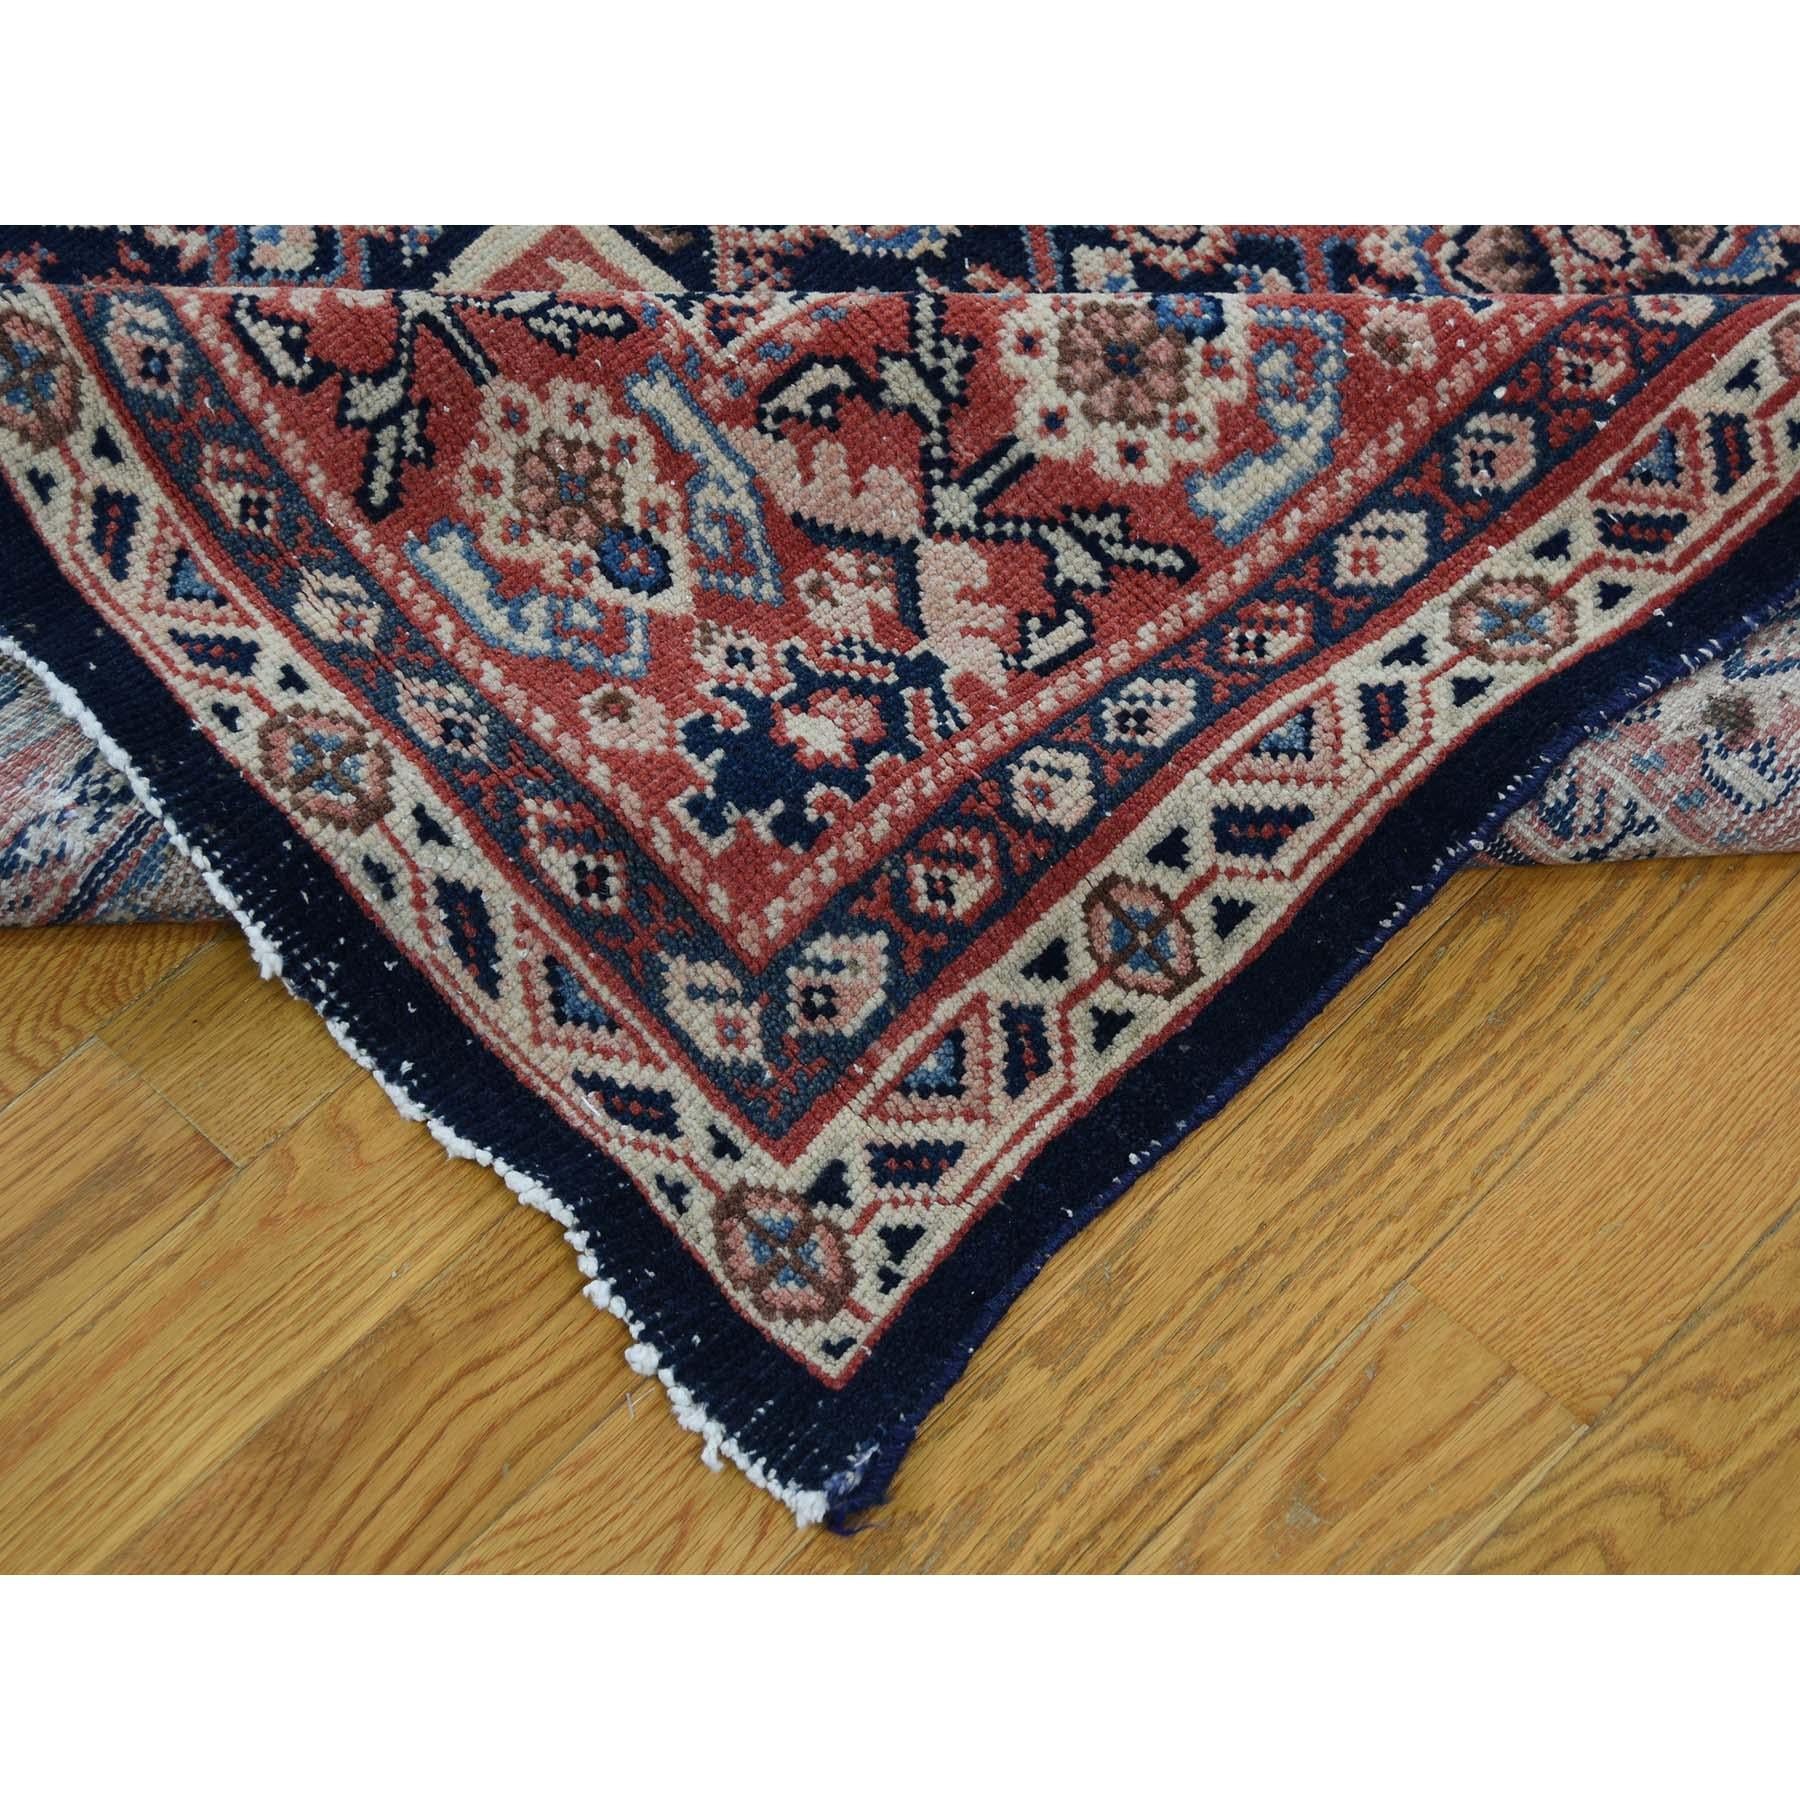 Antique Persian Mahal Even Wear Navy Blue Hand-Knotted Oriental Rug 1